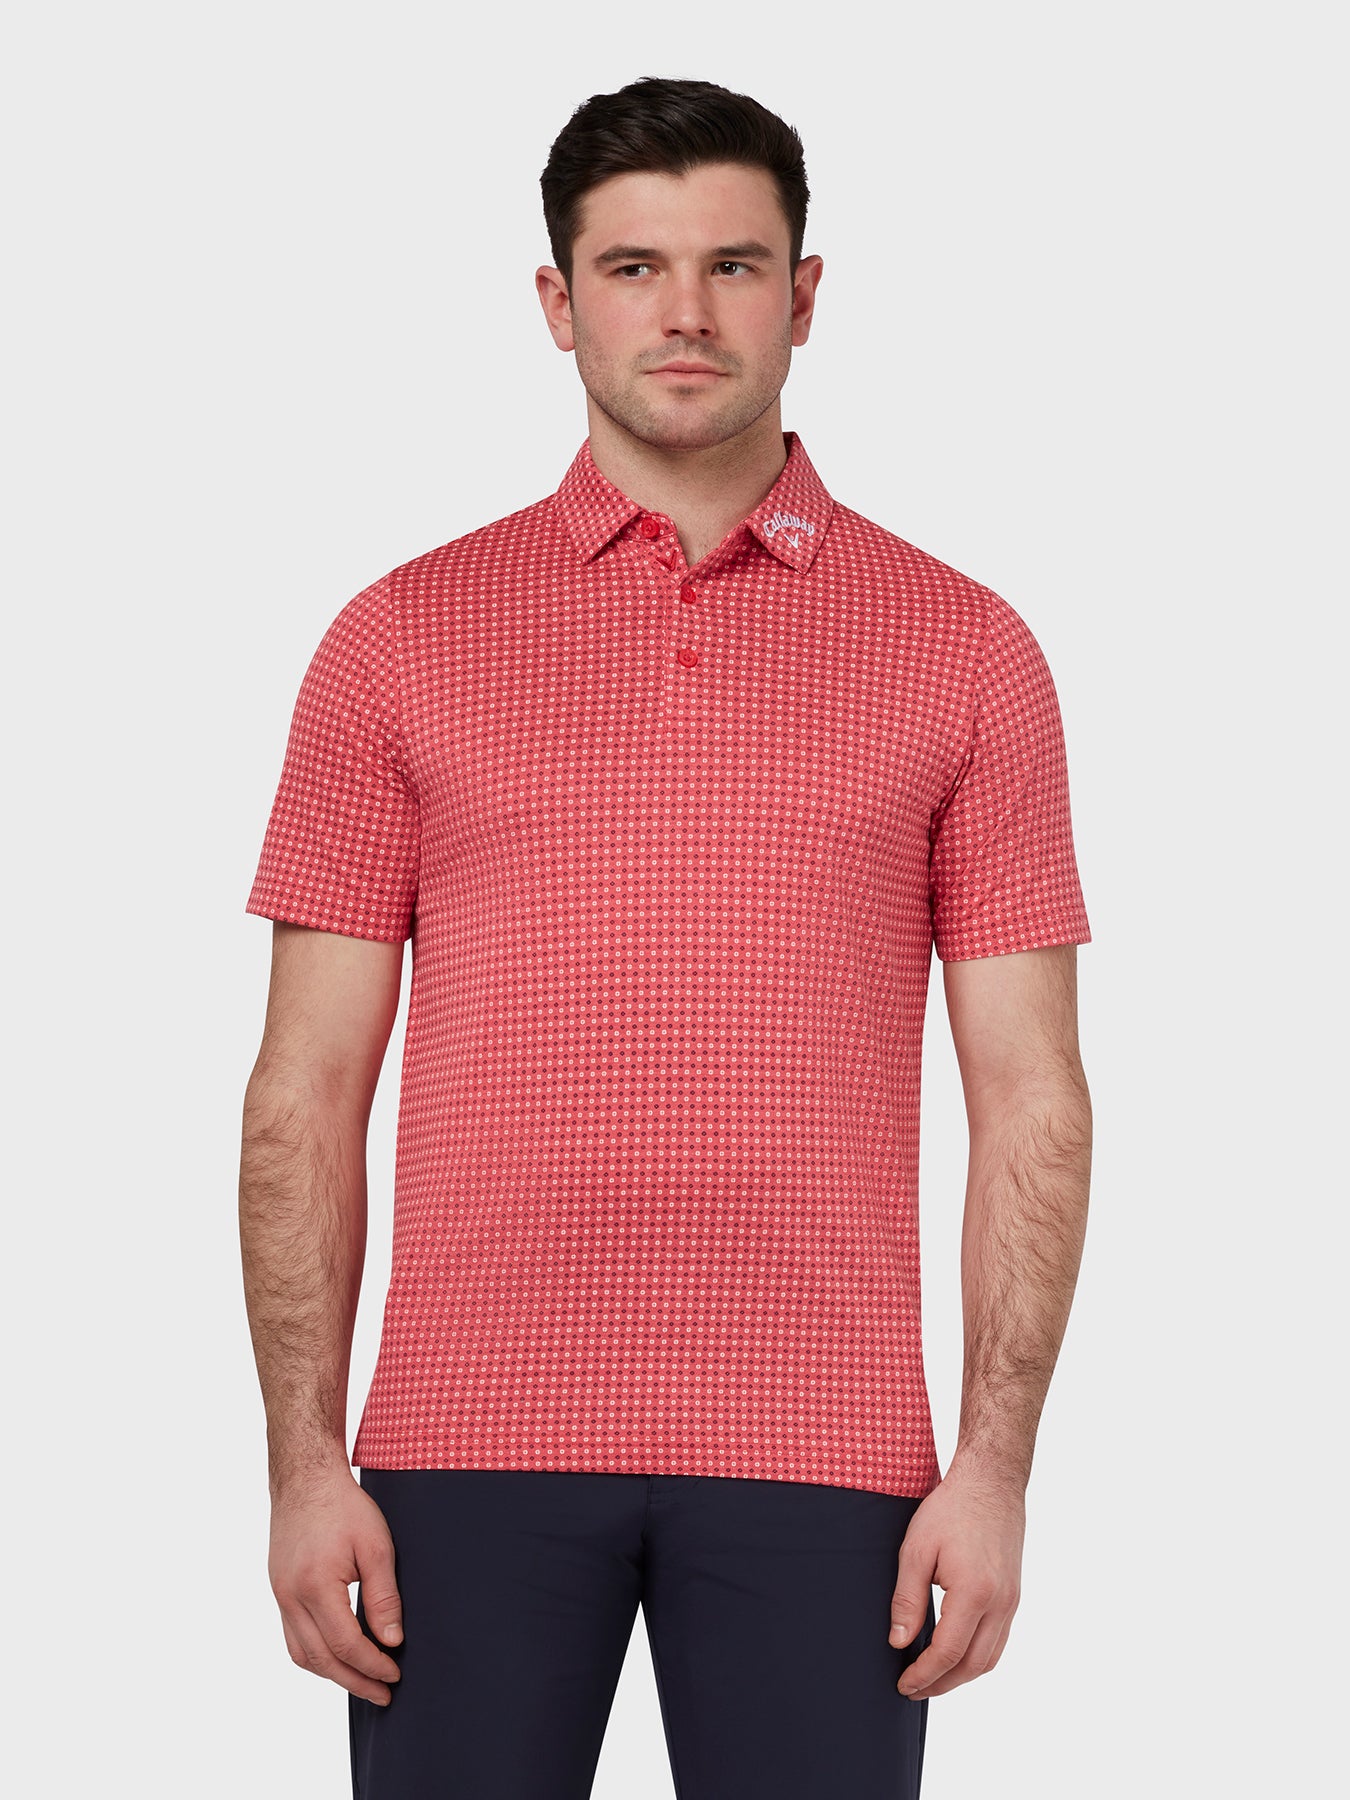 View Soft Touch Micro Print Polo In Teaberry Heather Teaberry Heather S information